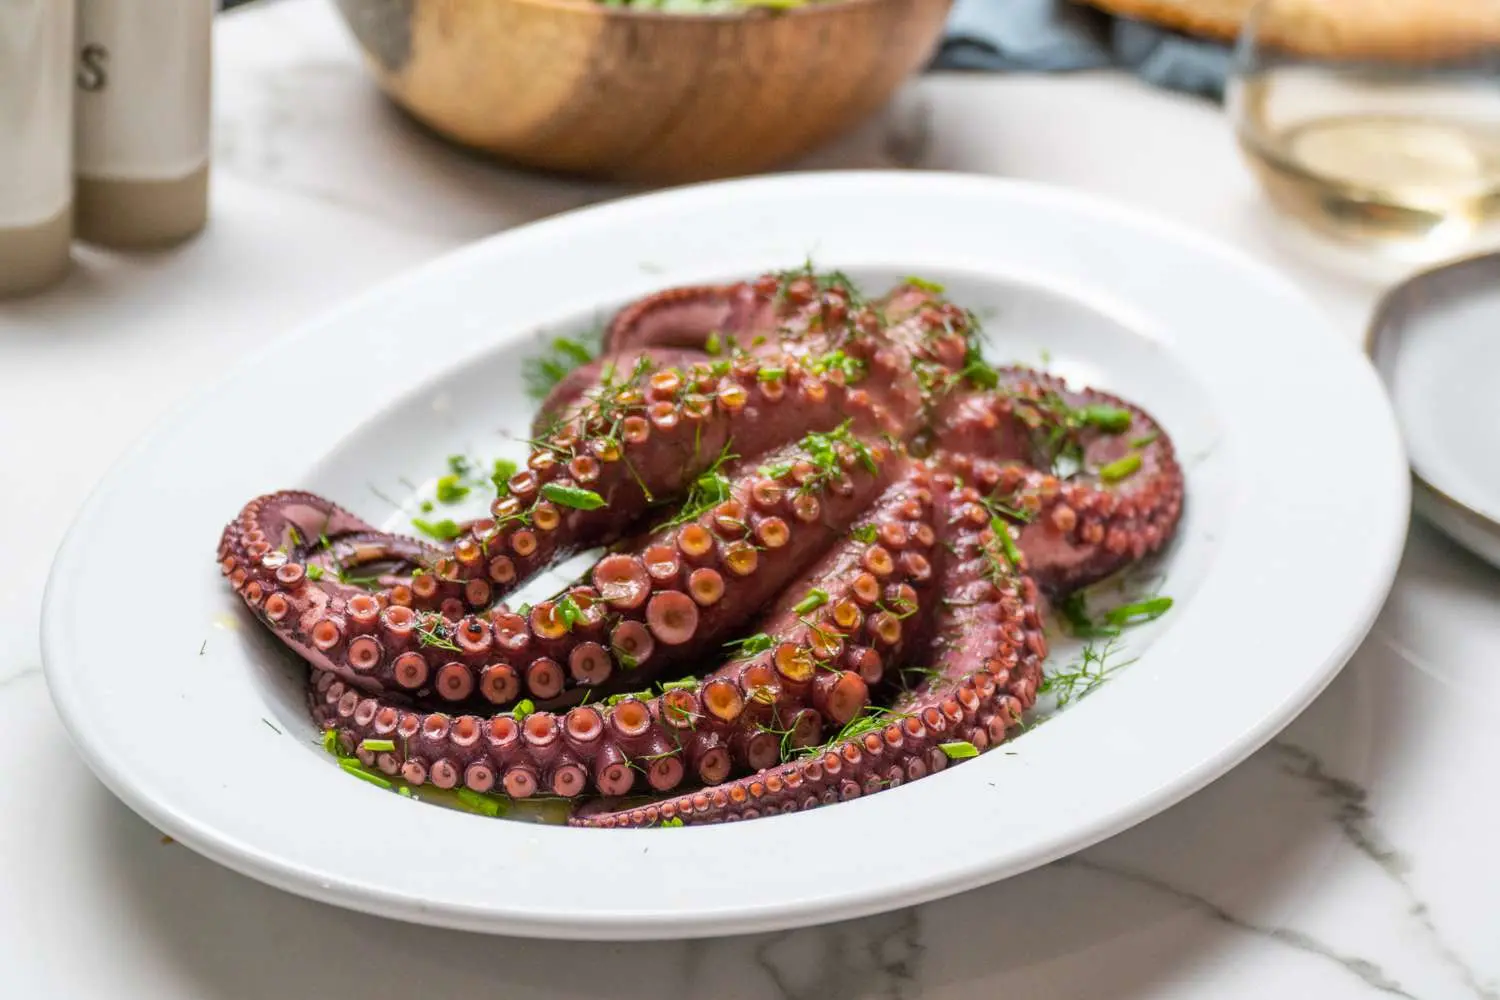 smoked octopus recipe - How do you cook octopus without making it chewy